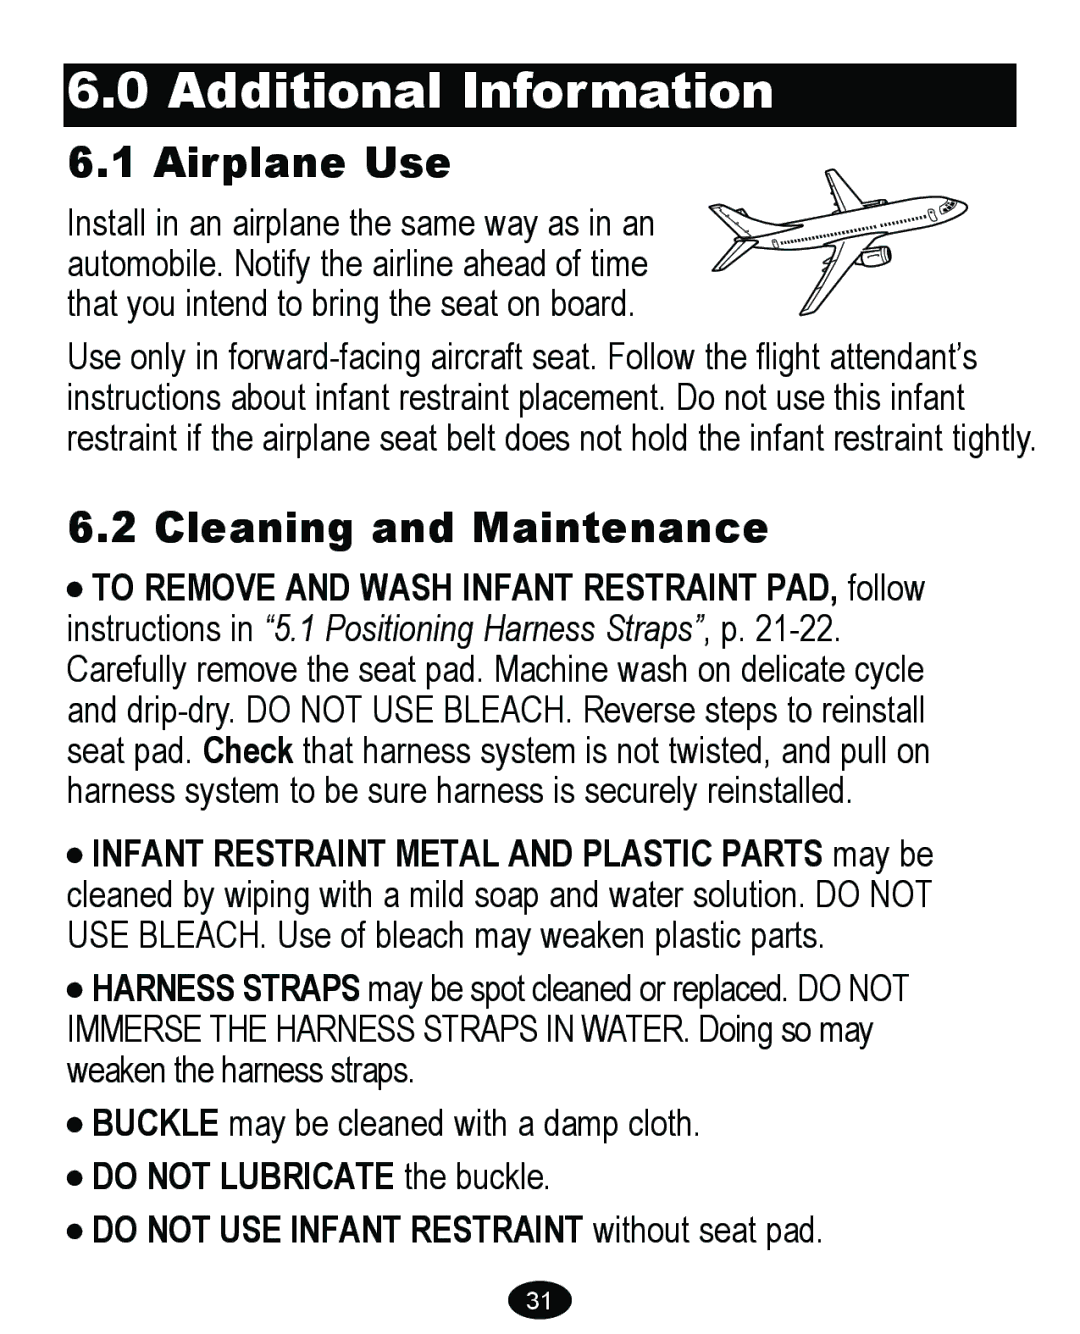 Graco 8474 owner manual Additional Information, Airplane Use, Cleaning and Maintenance 